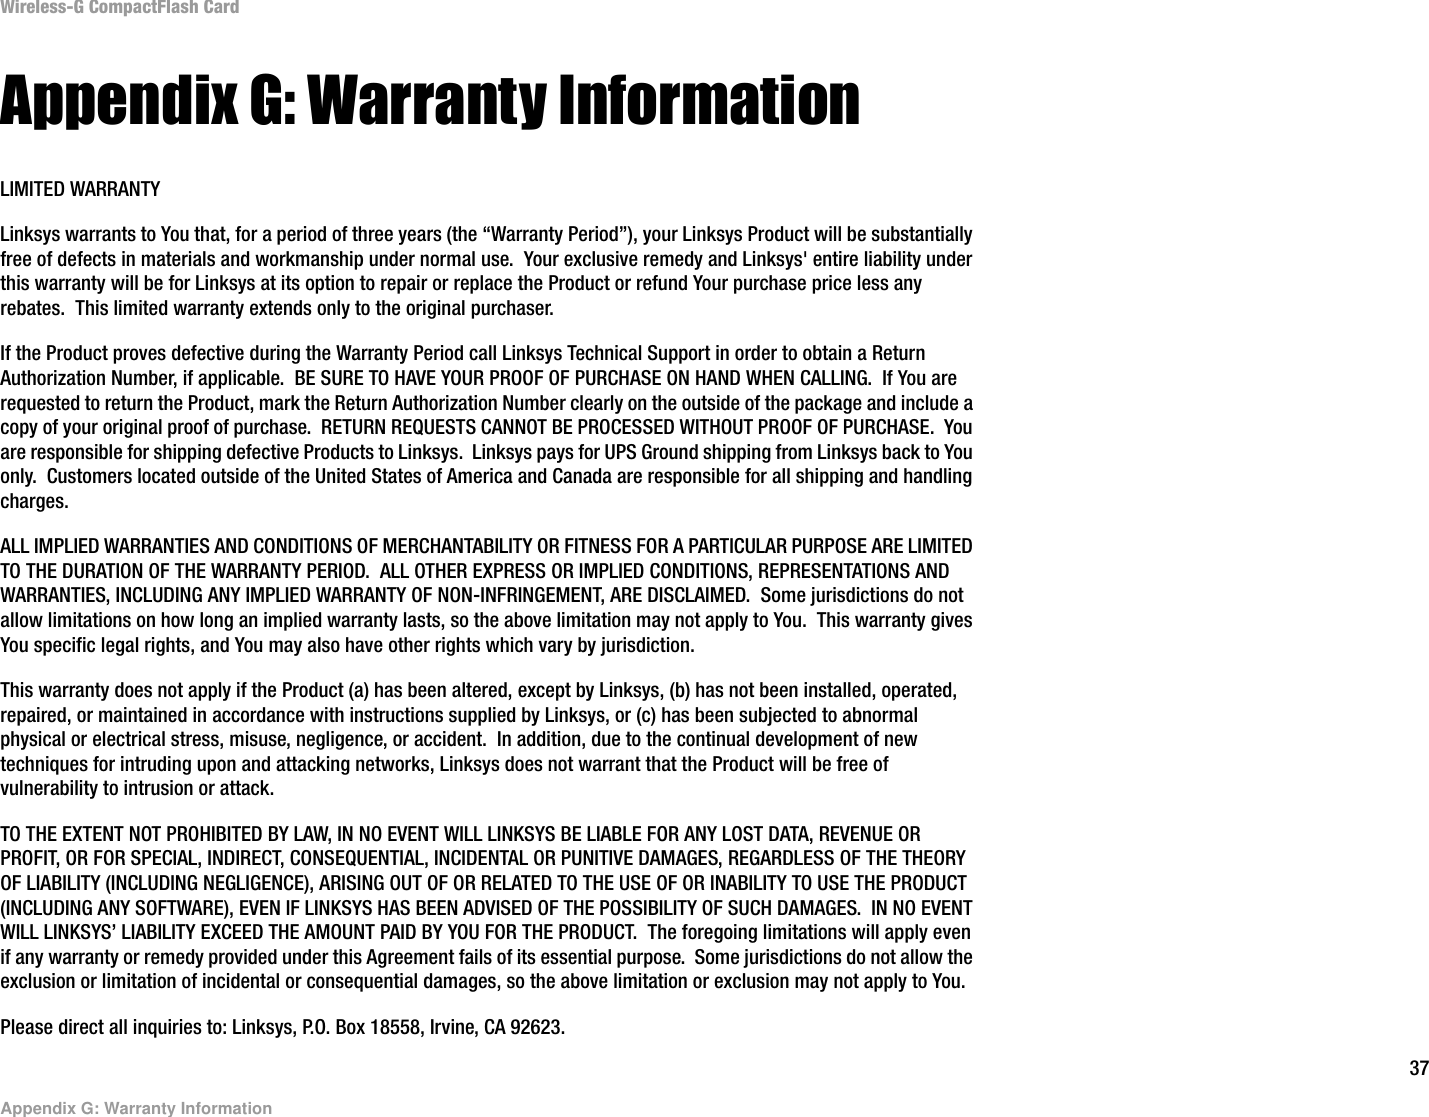 37Appendix G: Warranty InformationWireless-G CompactFlash CardAppendix G: Warranty InformationLIMITED WARRANTYLinksys warrants to You that, for a period of three years (the “Warranty Period”), your Linksys Product will be substantially free of defects in materials and workmanship under normal use.  Your exclusive remedy and Linksys&apos; entire liability under this warranty will be for Linksys at its option to repair or replace the Product or refund Your purchase price less any rebates.  This limited warranty extends only to the original purchaser.  If the Product proves defective during the Warranty Period call Linksys Technical Support in order to obtain a Return Authorization Number, if applicable.  BE SURE TO HAVE YOUR PROOF OF PURCHASE ON HAND WHEN CALLING.  If You are requested to return the Product, mark the Return Authorization Number clearly on the outside of the package and include a copy of your original proof of purchase.  RETURN REQUESTS CANNOT BE PROCESSED WITHOUT PROOF OF PURCHASE.  You are responsible for shipping defective Products to Linksys.  Linksys pays for UPS Ground shipping from Linksys back to You only.  Customers located outside of the United States of America and Canada are responsible for all shipping and handling charges. ALL IMPLIED WARRANTIES AND CONDITIONS OF MERCHANTABILITY OR FITNESS FOR A PARTICULAR PURPOSE ARE LIMITED TO THE DURATION OF THE WARRANTY PERIOD.  ALL OTHER EXPRESS OR IMPLIED CONDITIONS, REPRESENTATIONS AND WARRANTIES, INCLUDING ANY IMPLIED WARRANTY OF NON-INFRINGEMENT, ARE DISCLAIMED.  Some jurisdictions do not allow limitations on how long an implied warranty lasts, so the above limitation may not apply to You.  This warranty gives You specific legal rights, and You may also have other rights which vary by jurisdiction.This warranty does not apply if the Product (a) has been altered, except by Linksys, (b) has not been installed, operated, repaired, or maintained in accordance with instructions supplied by Linksys, or (c) has been subjected to abnormal physical or electrical stress, misuse, negligence, or accident.  In addition, due to the continual development of new techniques for intruding upon and attacking networks, Linksys does not warrant that the Product will be free of vulnerability to intrusion or attack.TO THE EXTENT NOT PROHIBITED BY LAW, IN NO EVENT WILL LINKSYS BE LIABLE FOR ANY LOST DATA, REVENUE OR PROFIT, OR FOR SPECIAL, INDIRECT, CONSEQUENTIAL, INCIDENTAL OR PUNITIVE DAMAGES, REGARDLESS OF THE THEORY OF LIABILITY (INCLUDING NEGLIGENCE), ARISING OUT OF OR RELATED TO THE USE OF OR INABILITY TO USE THE PRODUCT (INCLUDING ANY SOFTWARE), EVEN IF LINKSYS HAS BEEN ADVISED OF THE POSSIBILITY OF SUCH DAMAGES.  IN NO EVENT WILL LINKSYS’ LIABILITY EXCEED THE AMOUNT PAID BY YOU FOR THE PRODUCT.  The foregoing limitations will apply even if any warranty or remedy provided under this Agreement fails of its essential purpose.  Some jurisdictions do not allow the exclusion or limitation of incidental or consequential damages, so the above limitation or exclusion may not apply to You.Please direct all inquiries to: Linksys, P.O. Box 18558, Irvine, CA 92623.